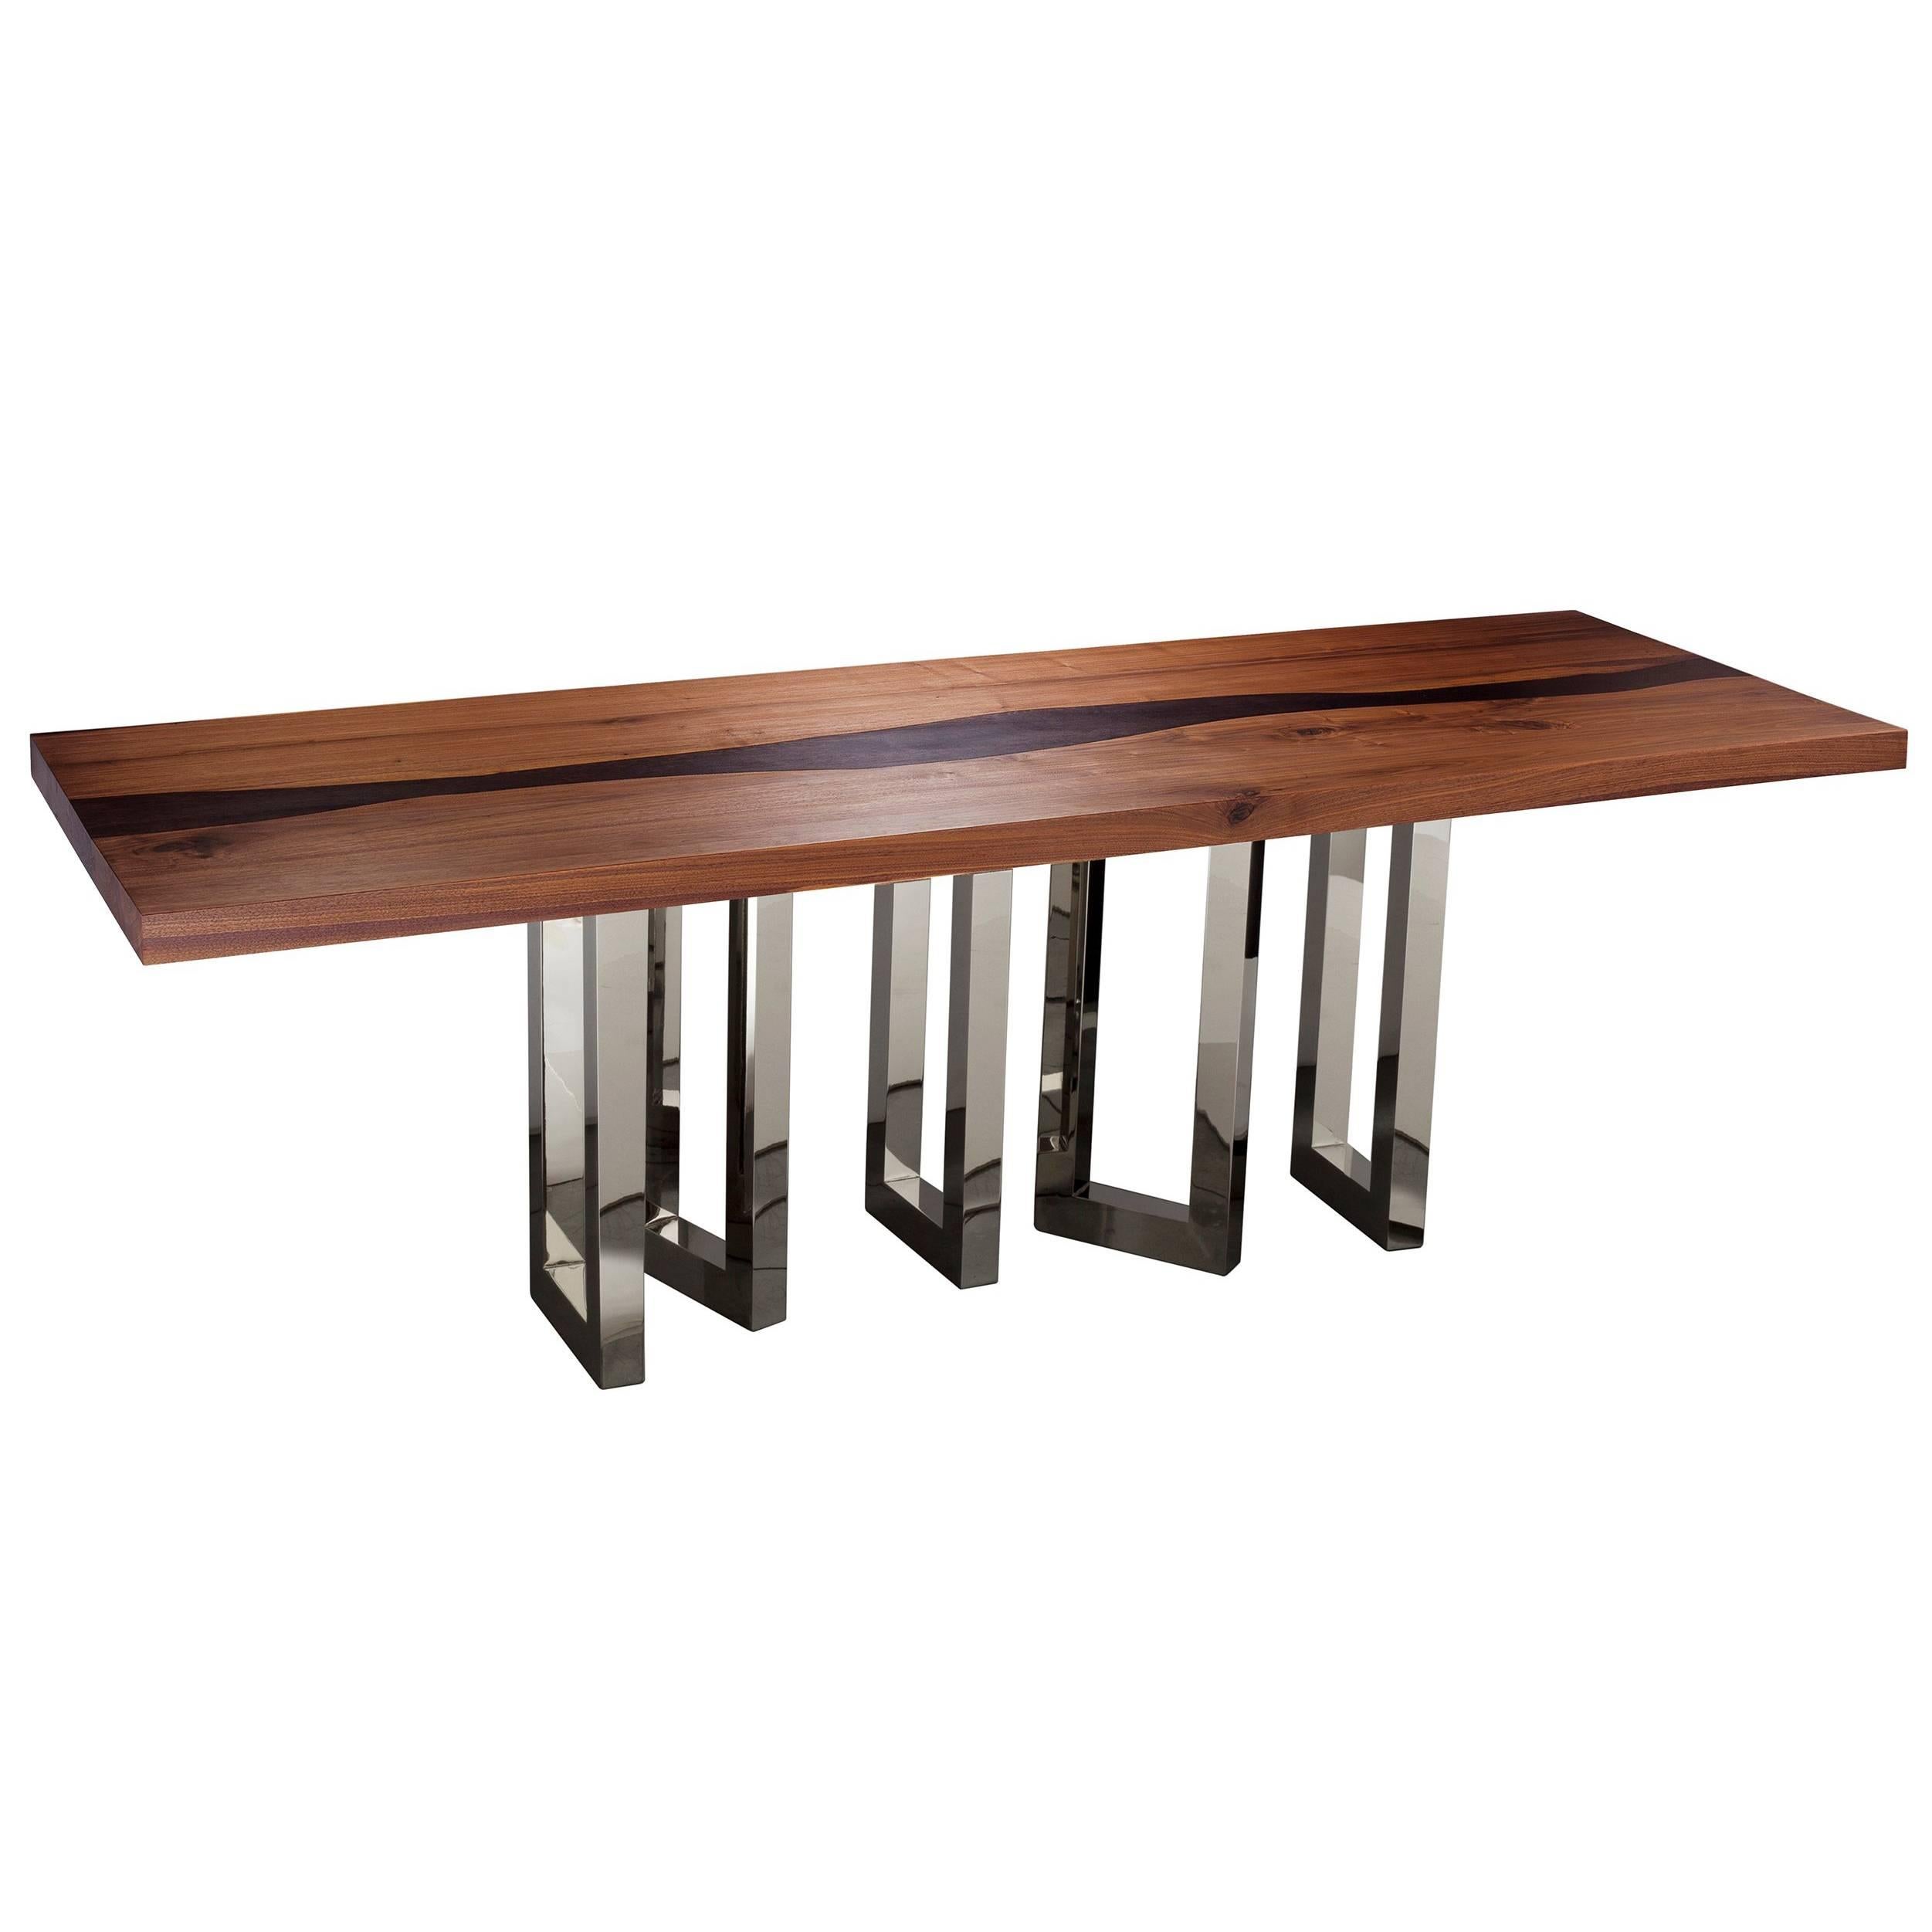 "Il Pezzo 6 Long Table" length 260cm/102.4” - walnut and wenge - nickel base